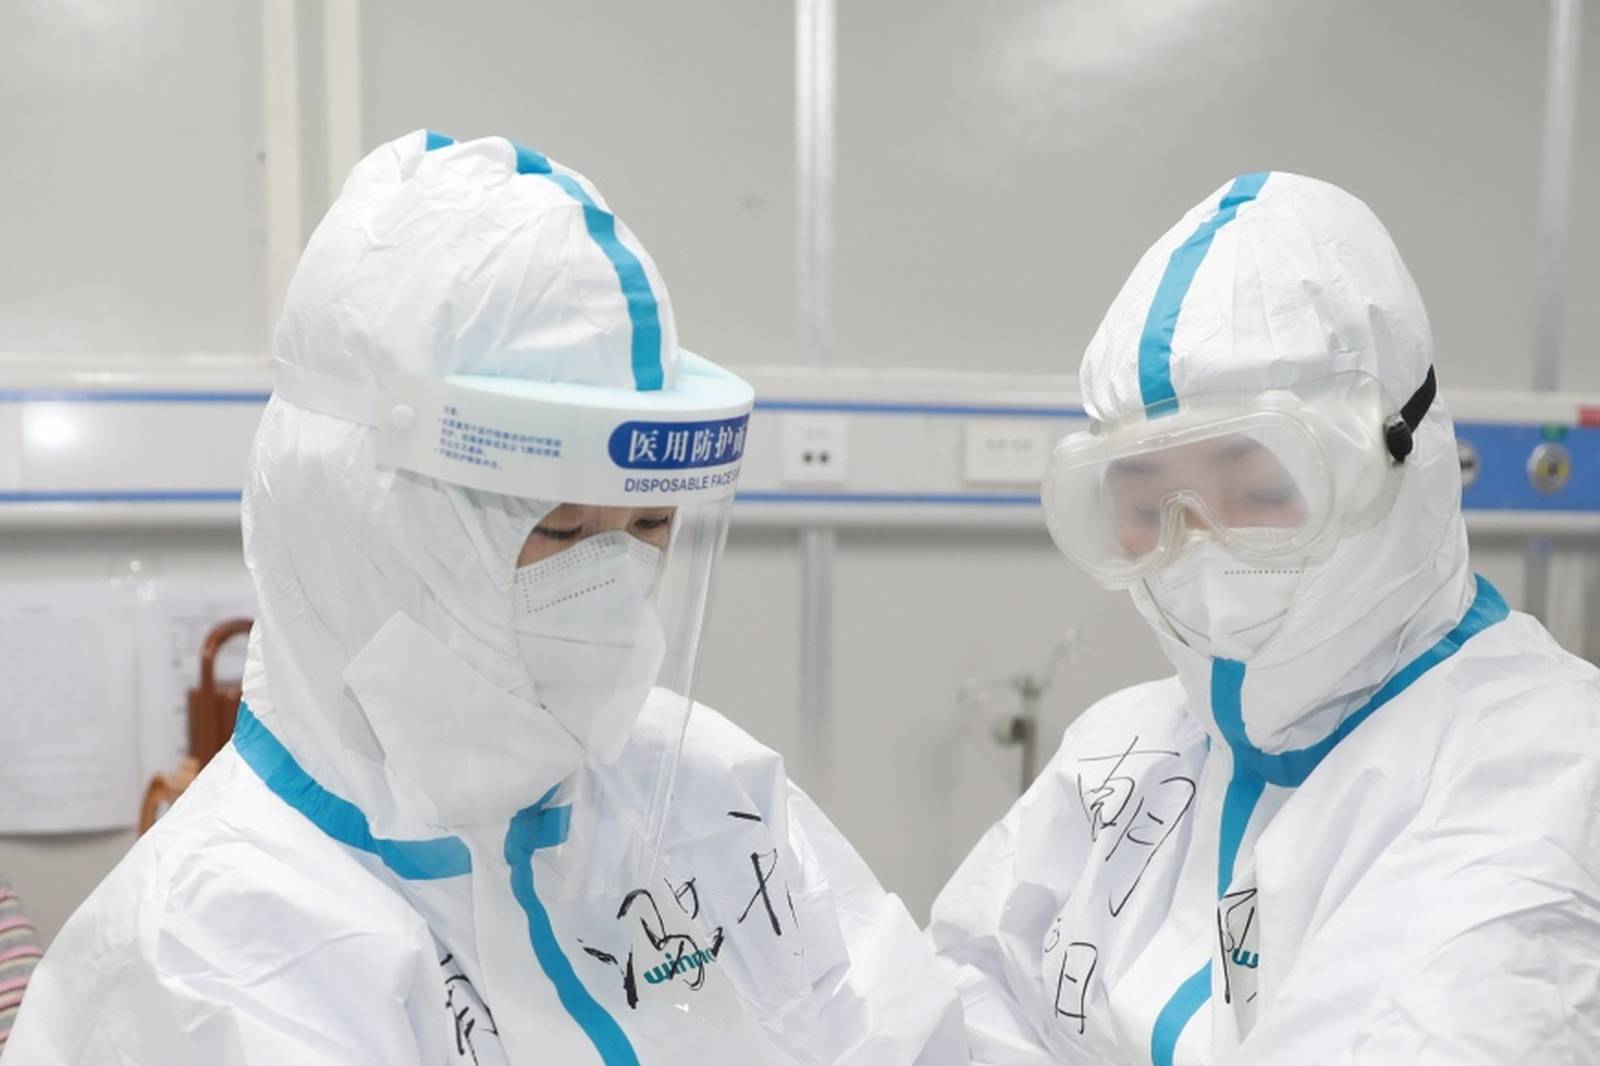 Medical worker writes down a patient's dietary information on a colleague's protective suit inside Leishenshan hospital in Wuhan